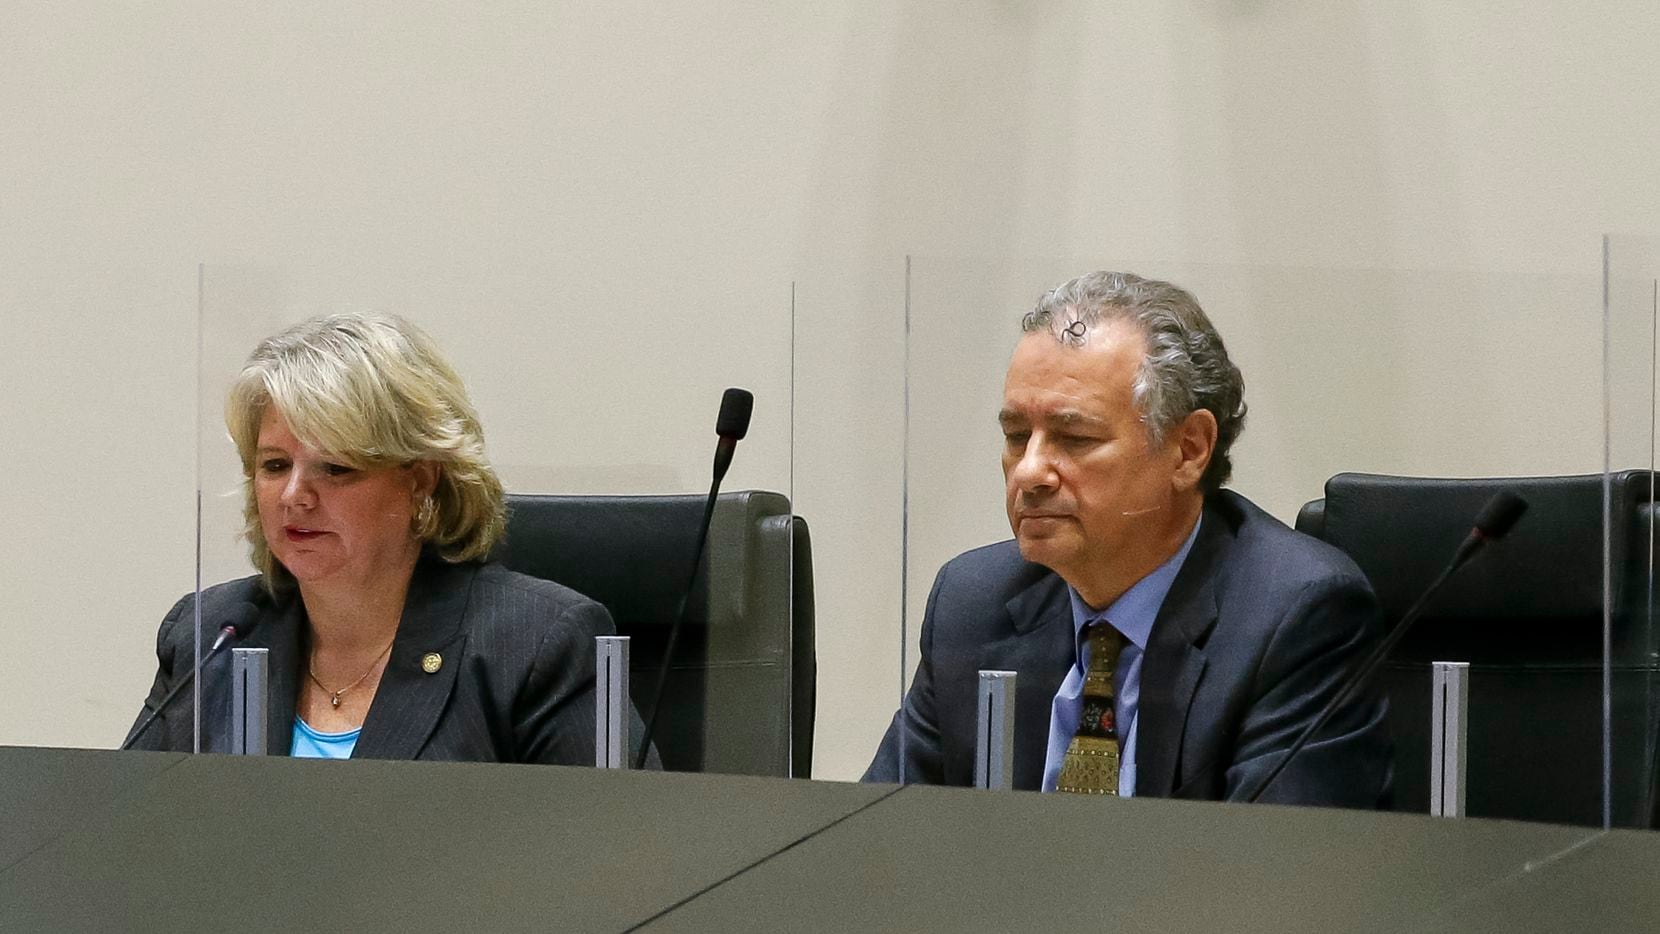 Dallas City Council member Cara Mendelsohn (left) and City Attorney Chris Caso listen to remarks during a council committee meeting at City Hall on Friday, Sept. 10, 2021, in Dallas.